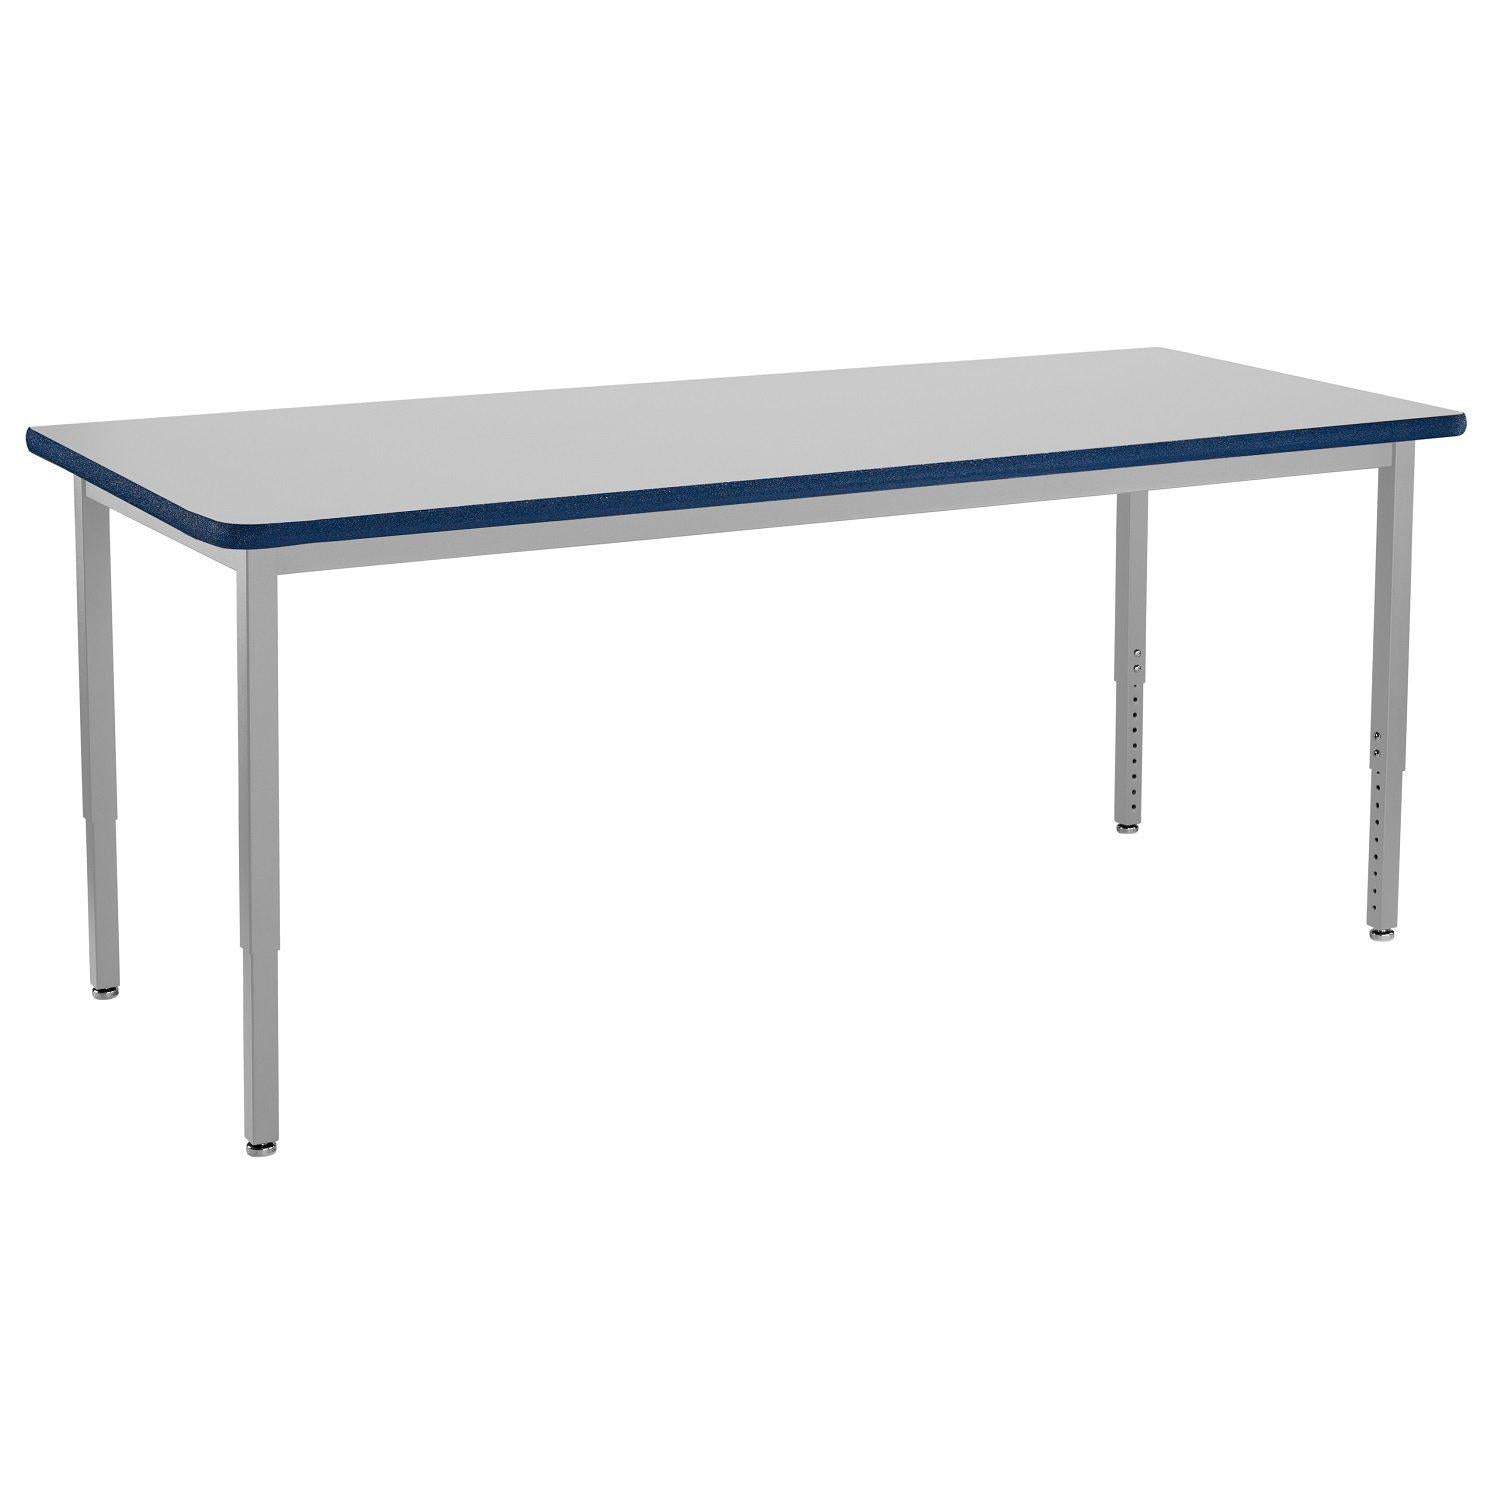 Heavy-Duty Height-Adjustable Utility Table, Soft Grey Frame, 24" x 84", Supreme High-Pressure Laminate Top with Black ProtectEdge